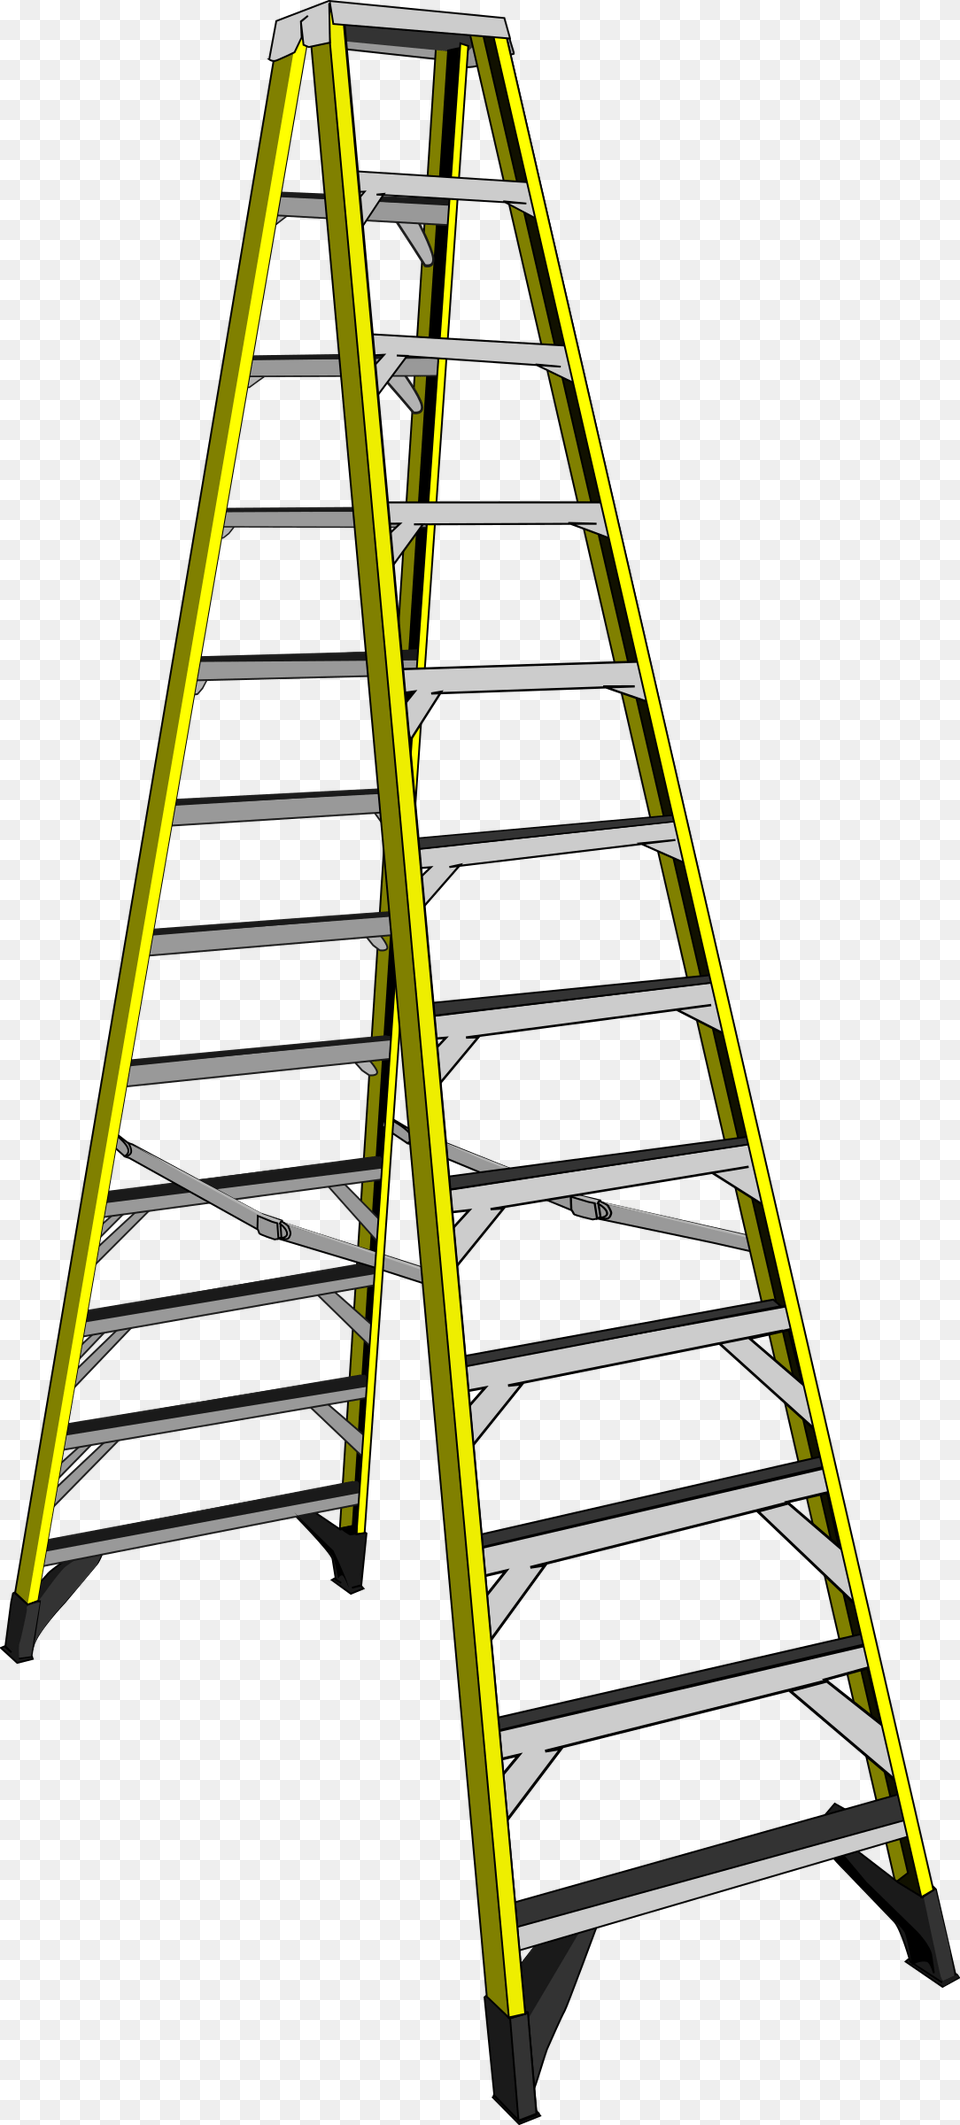 This Free Icons Design Of Large Yellow Ladder 14 Step Ladder, Drying Rack Png